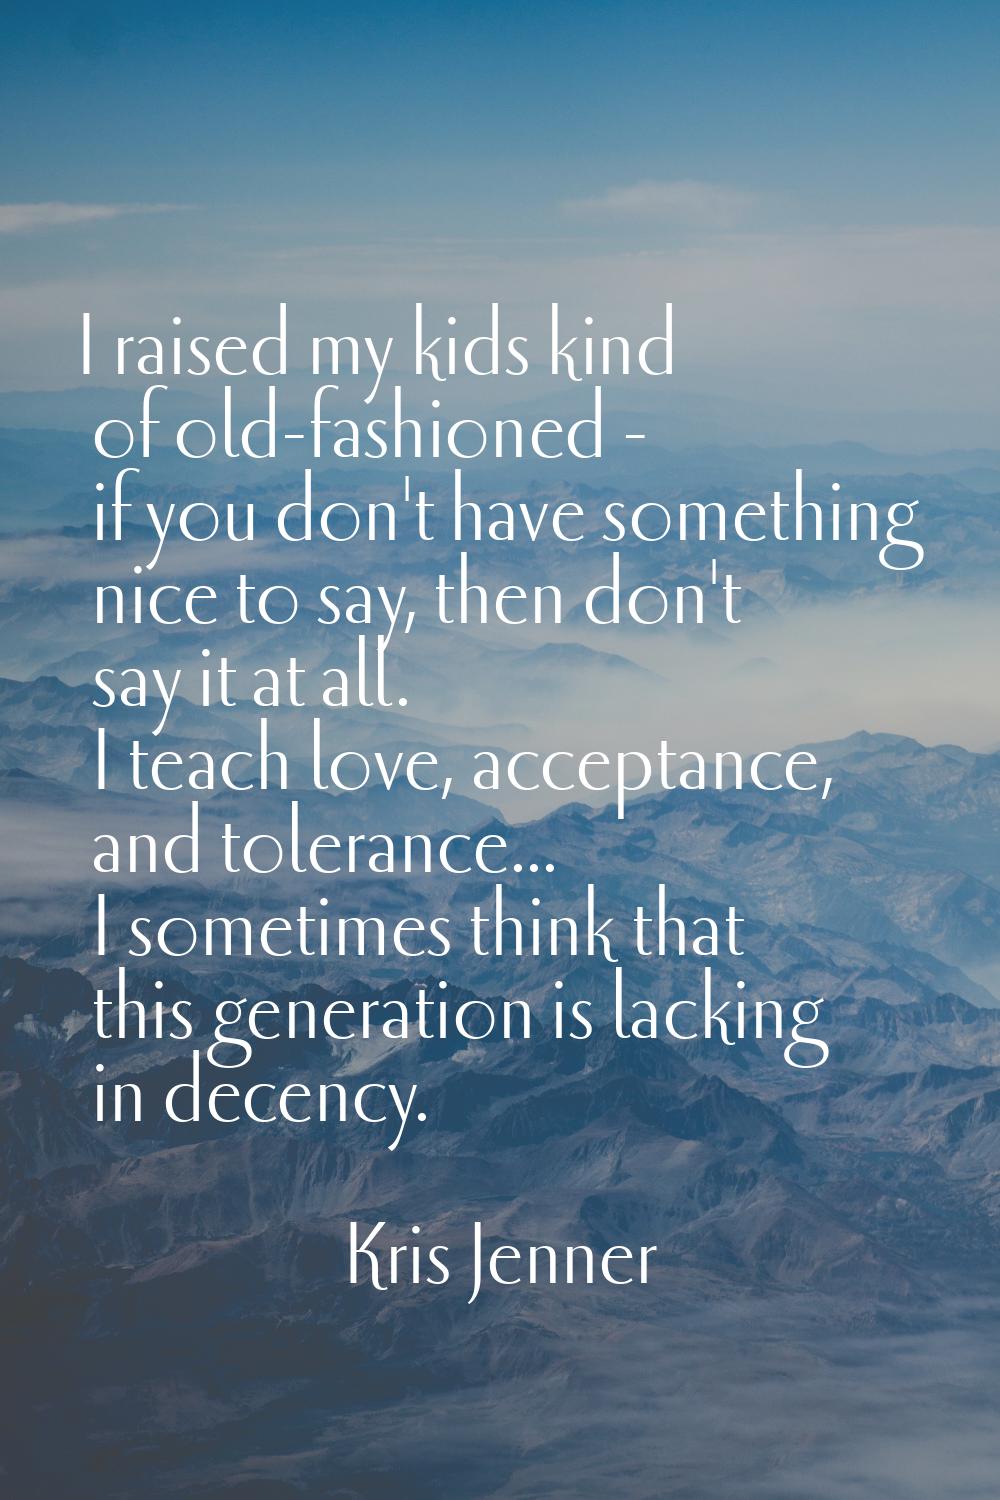 I raised my kids kind of old-fashioned - if you don't have something nice to say, then don't say it